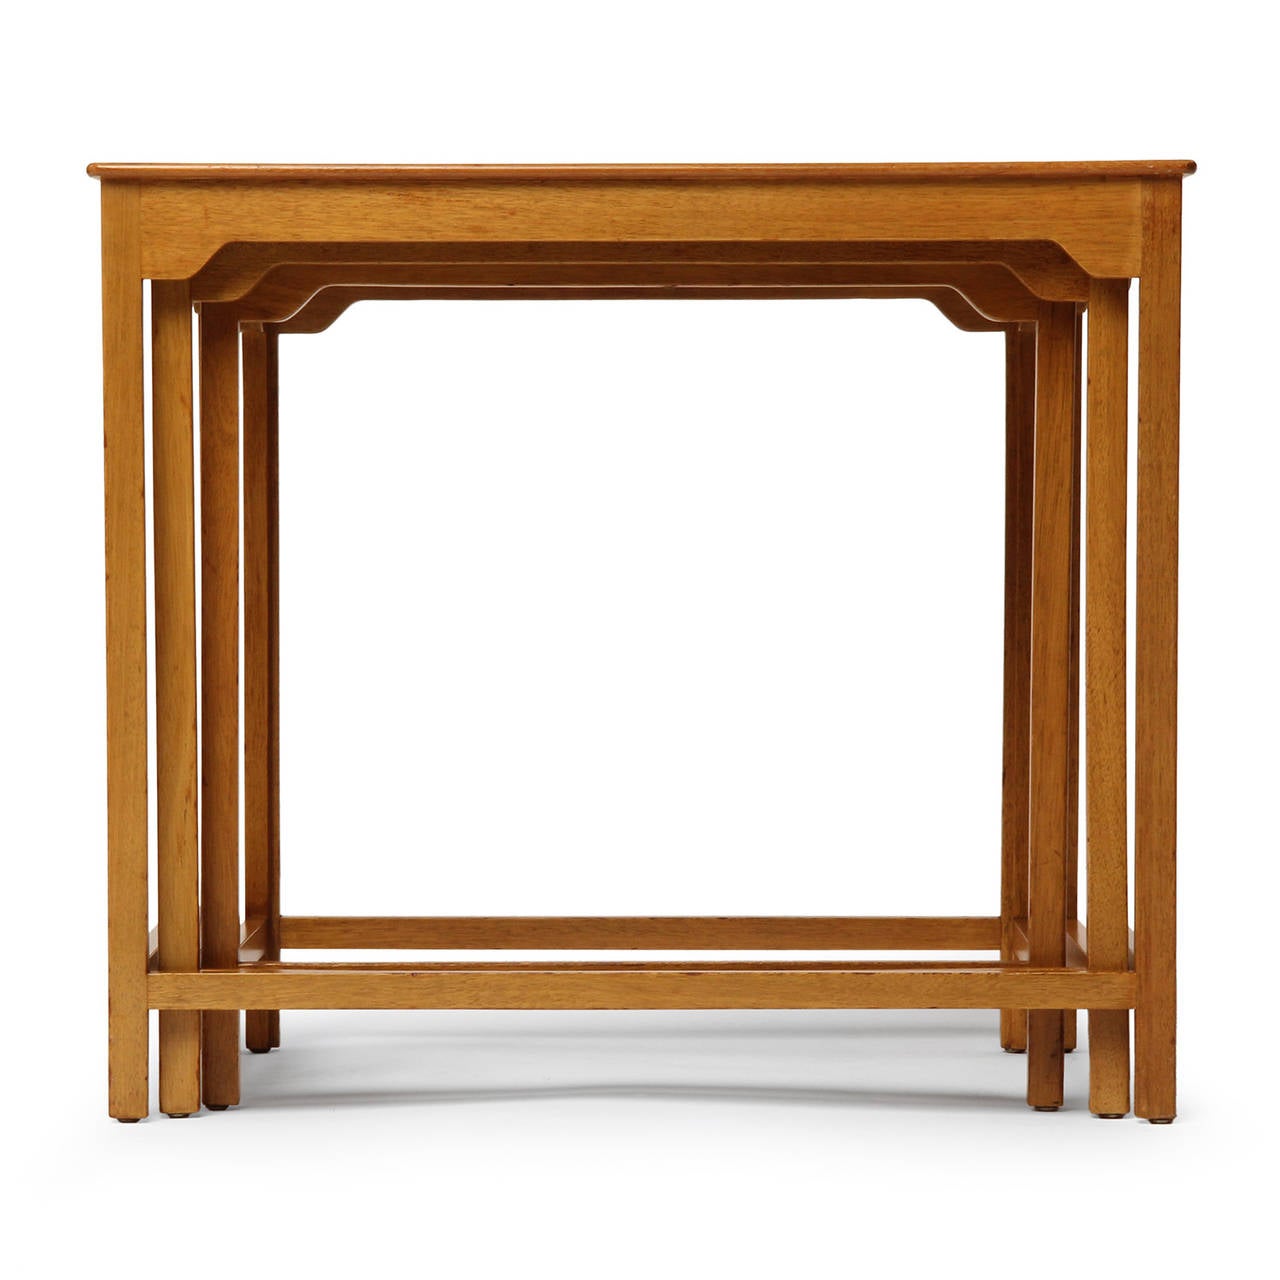 An elegantly detailed and finely crafted set of nesting tables in light walnut.